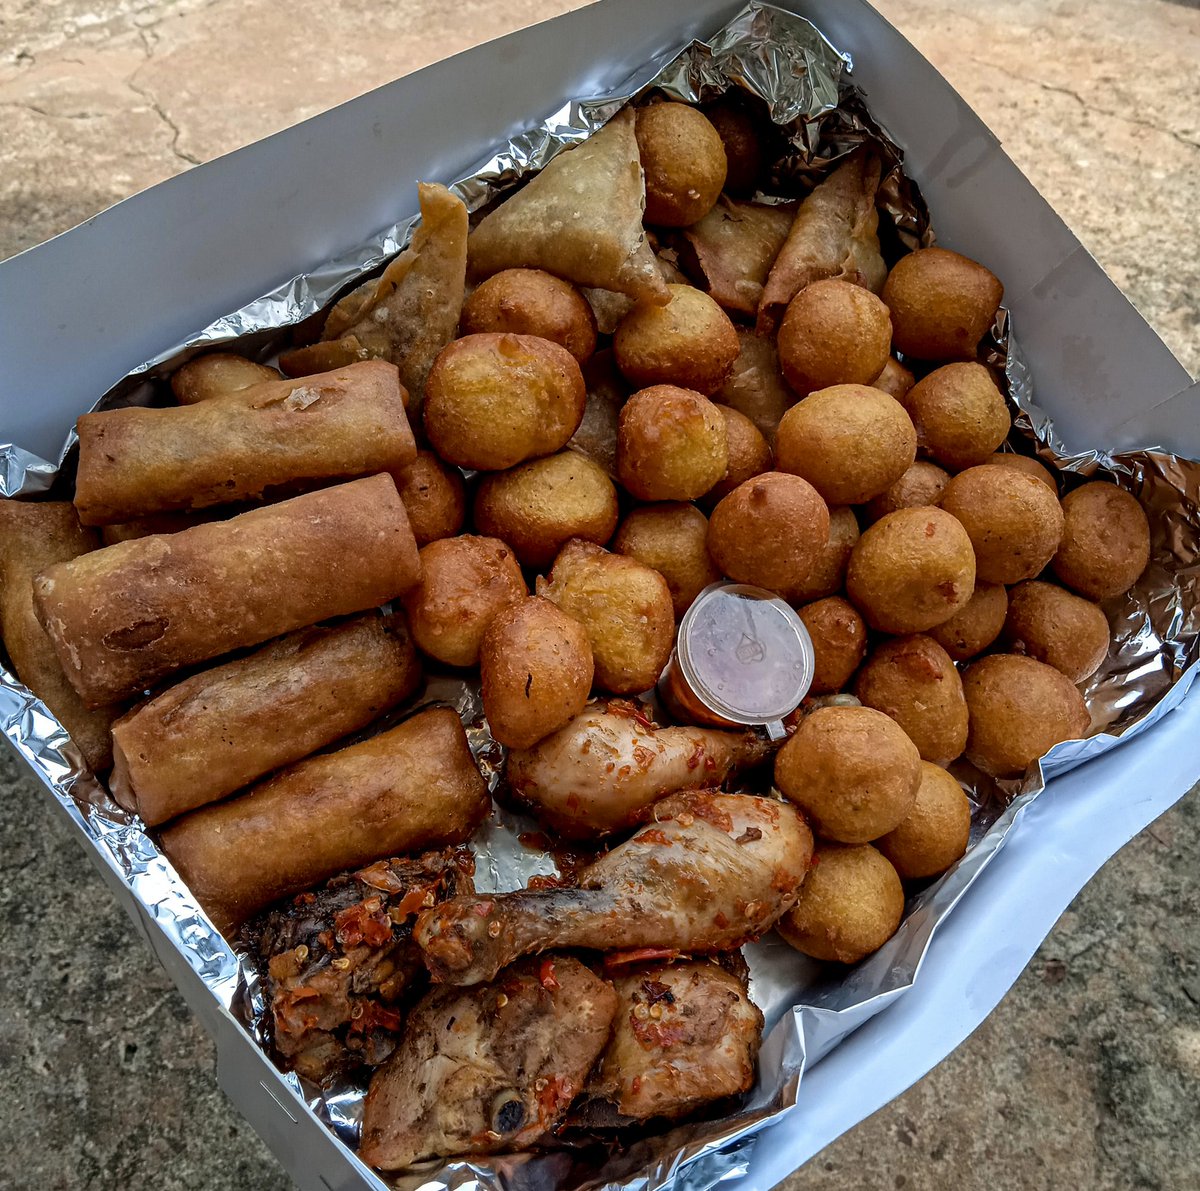 Small Chops for a Small Chops Lover 🥰🥰🥰🥰 Good Afternoon 🥰🥰🥰. Please Retweet 🙏🙏🙏